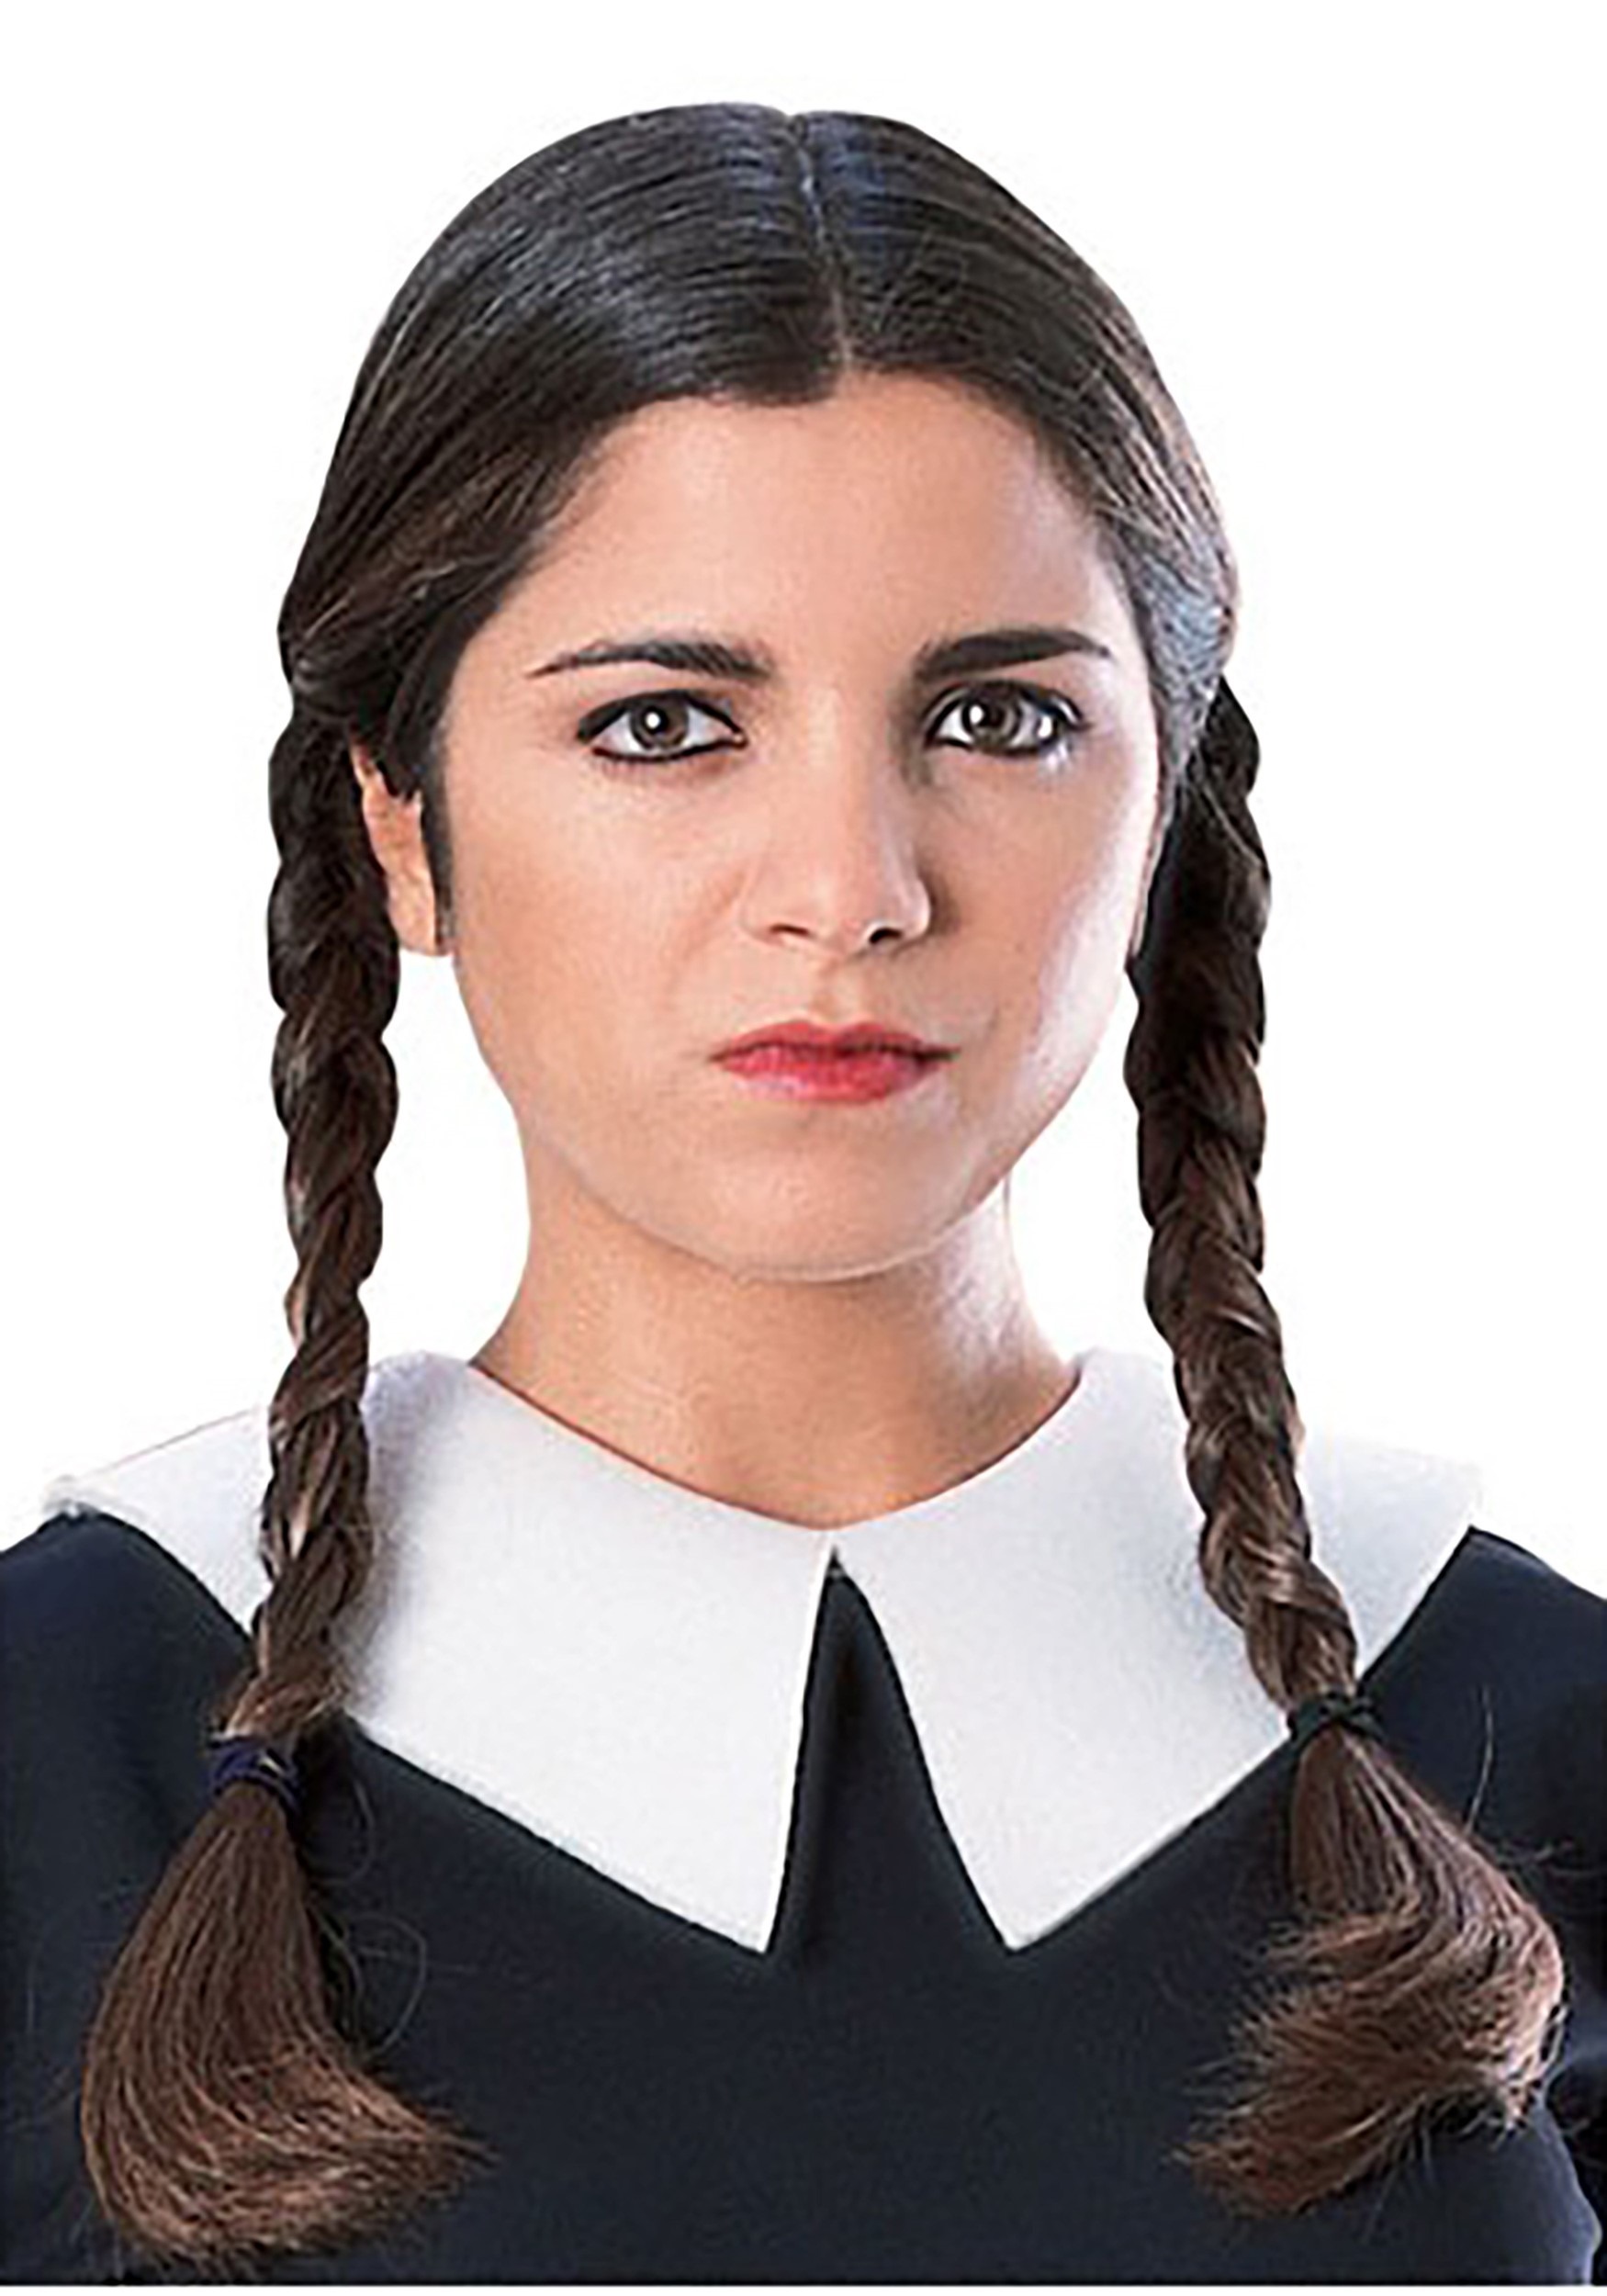 Wednesday Addams Hair Color - Best Hairstyles Ideas for Women and Men ...